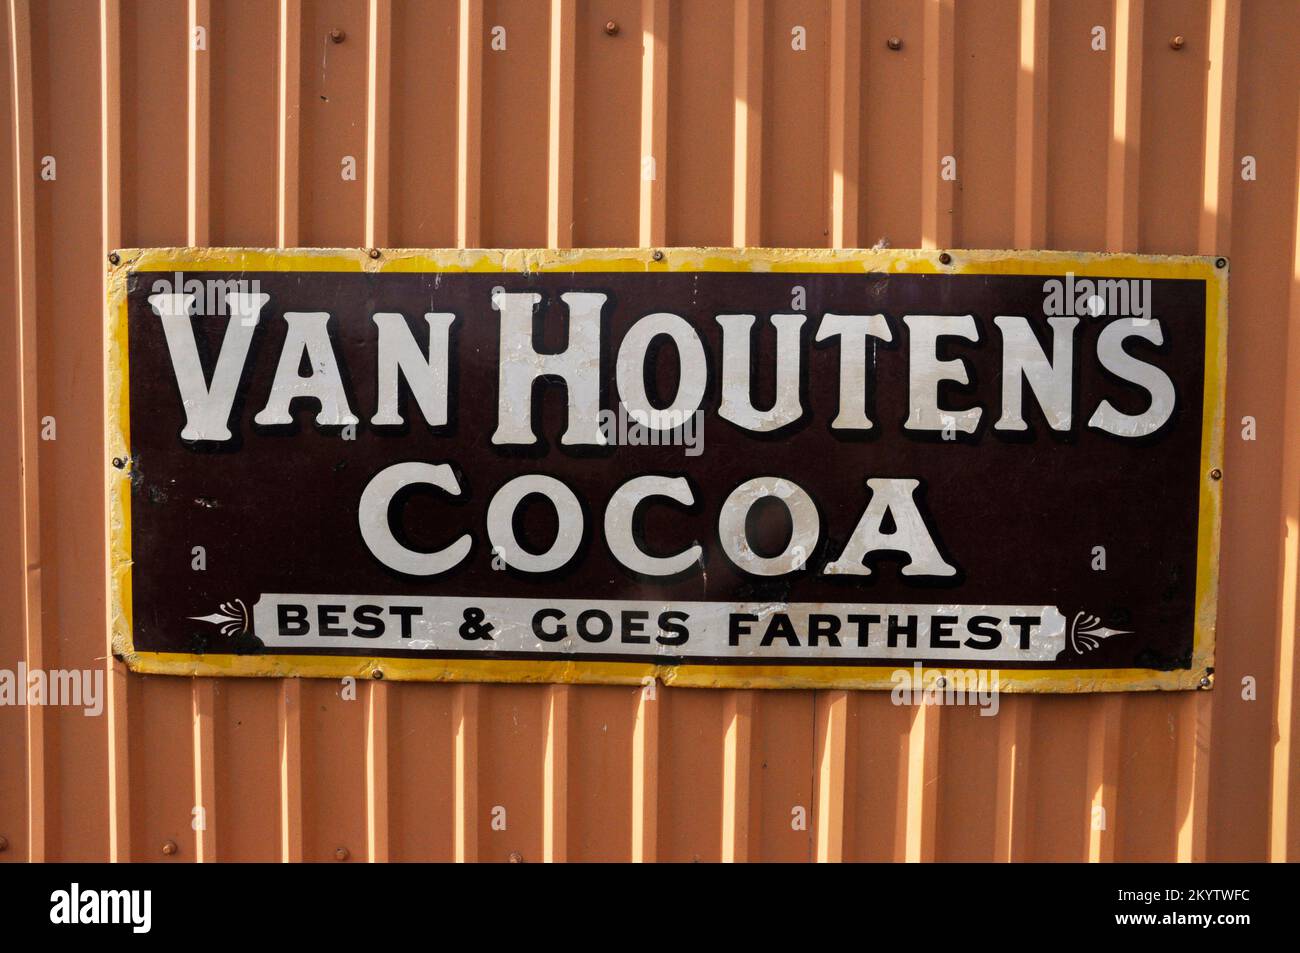 Enamelled metal sign, advertising Van Houten's cocoa photographed at Bishops Lydeard station on the West Somerset railway in Somerset,England, UK Stock Photo